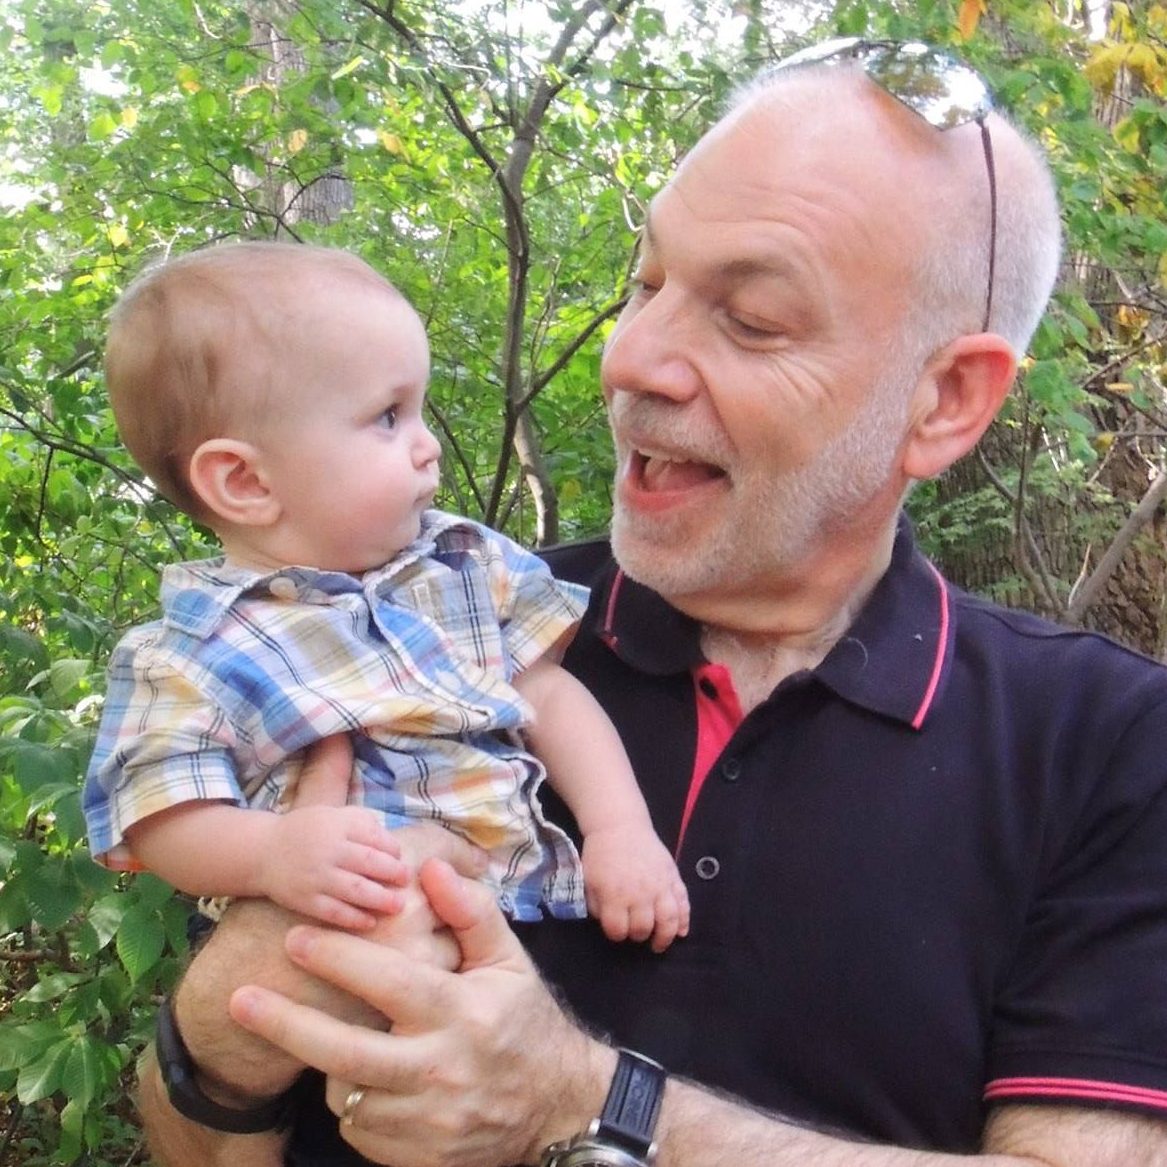 An older man with a collared shirt and glasses on his head holds a baby, smiling and talking to him as the baby stares back at the man in awe.